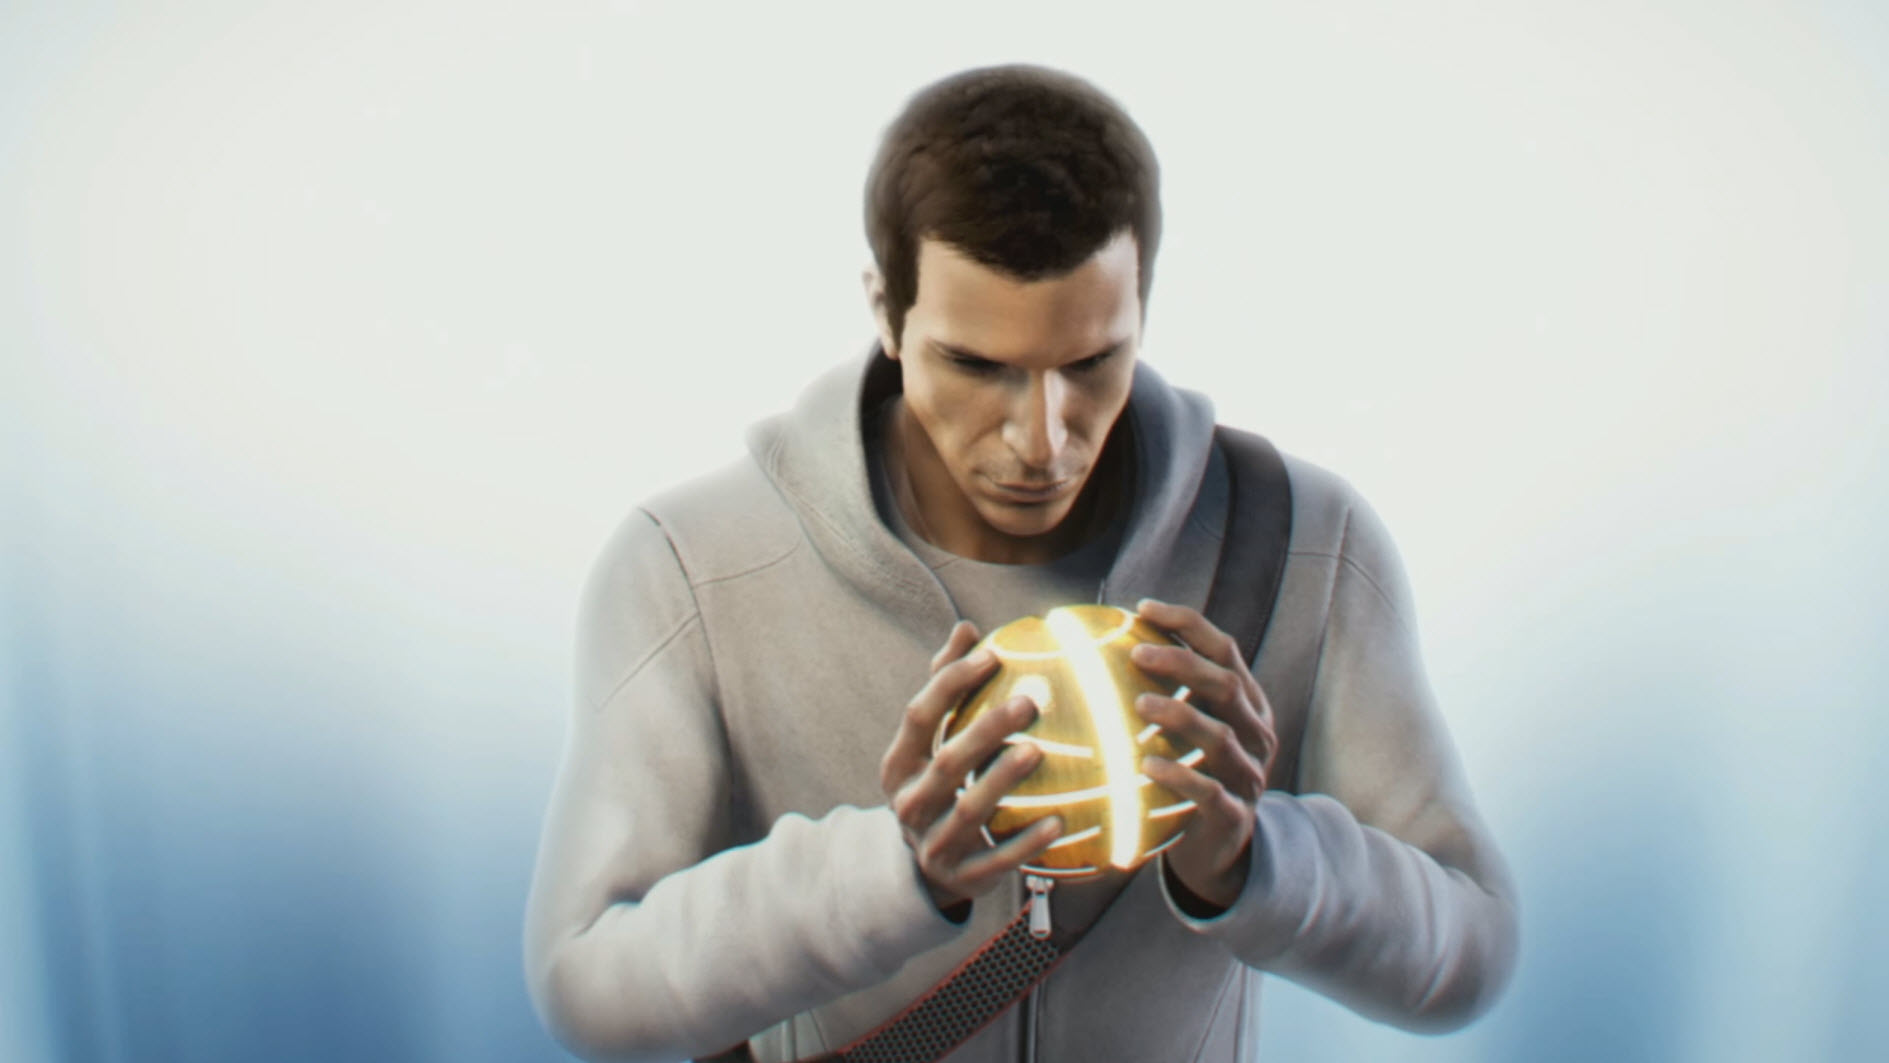 Assassin's Creed The Present-day Story So Far - Desmond Miles Apple Of Eden , HD Wallpaper & Backgrounds